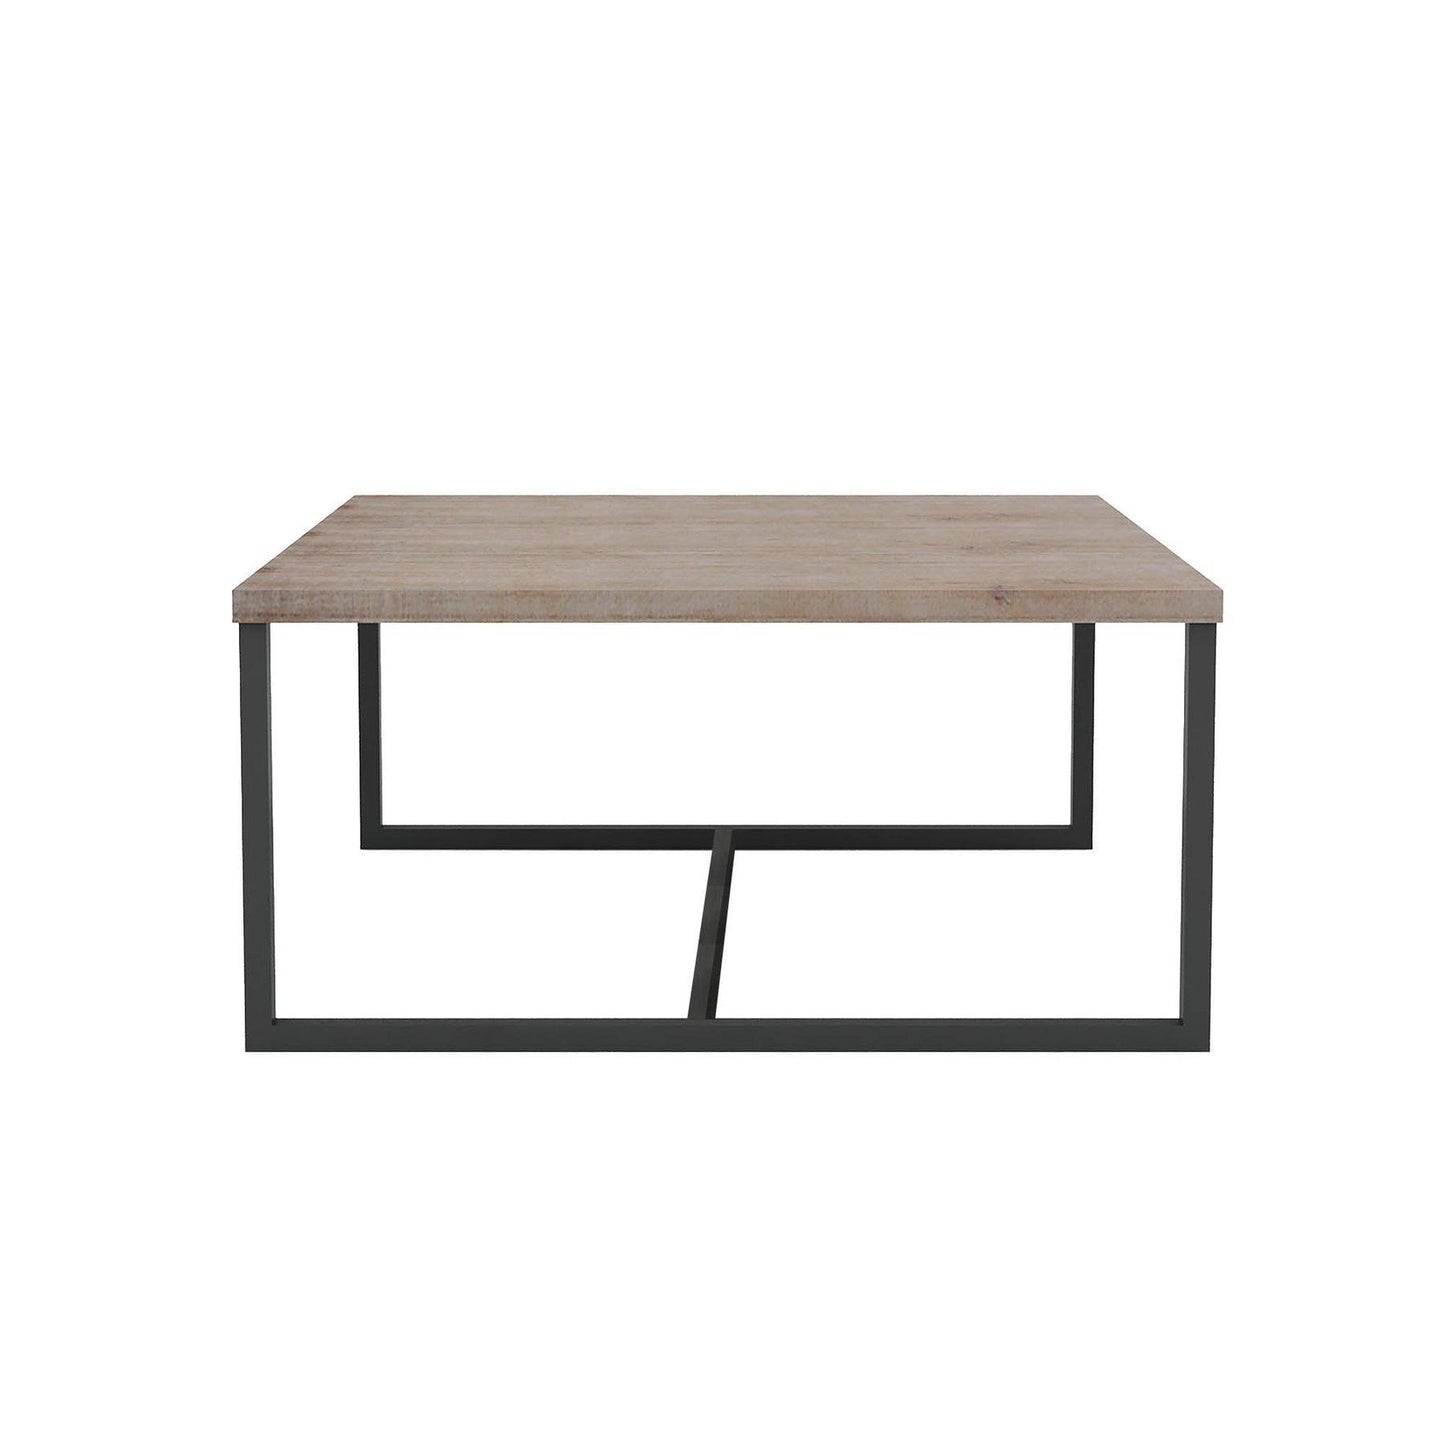 Natural Brown Square Coffee Table Wood Top With Metal Base - Sideboards and Things Accents_Black, Accents_Two Tone, Brand_LH Imports, Color_Multicolor, Color_Natural, Finish_Distressed, Materials_Metal, Metal Type_Iron, Product Type_Coffee Table, Shape_Square, Table Base_Metal, Table Top_Wood, Width_30-40, Wood Species_Acacia